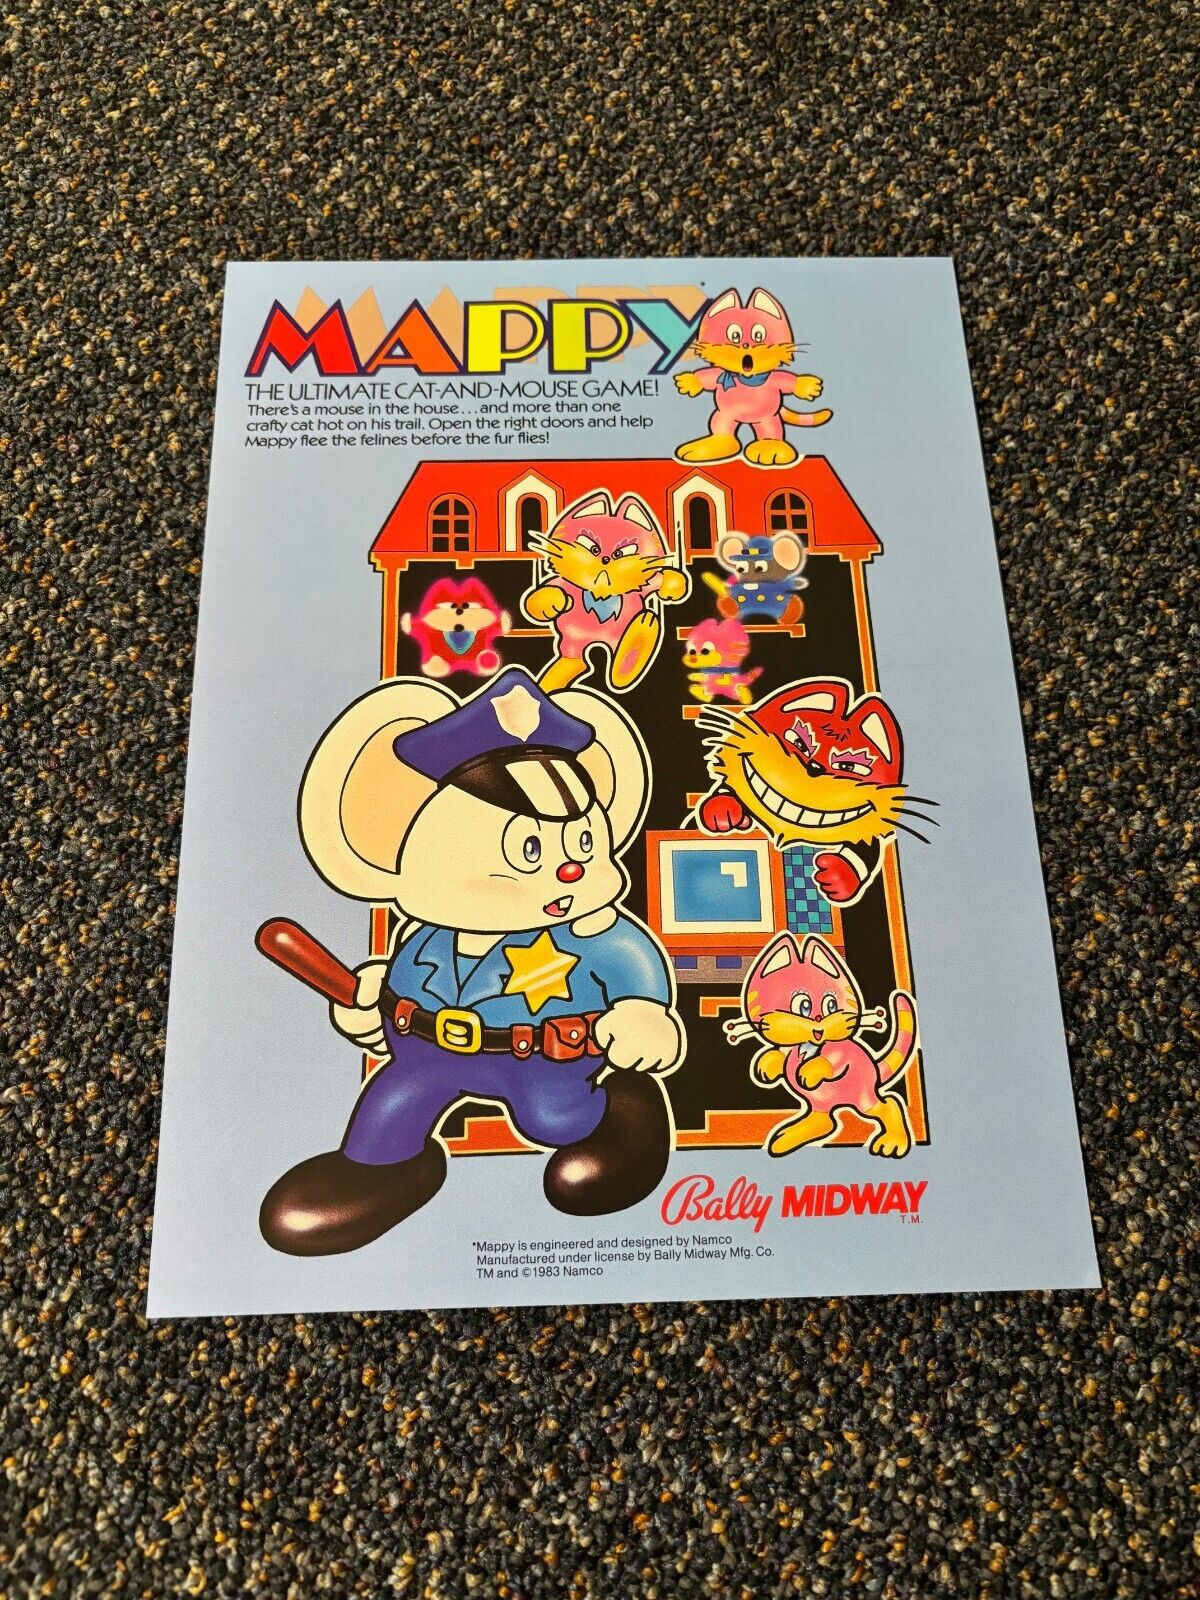 2 DIFF 1983 BALLY/MIDWAY FACTORY ORIGINAL FLYERS TO PROMOTE THE MAPPY VIDEO GAME